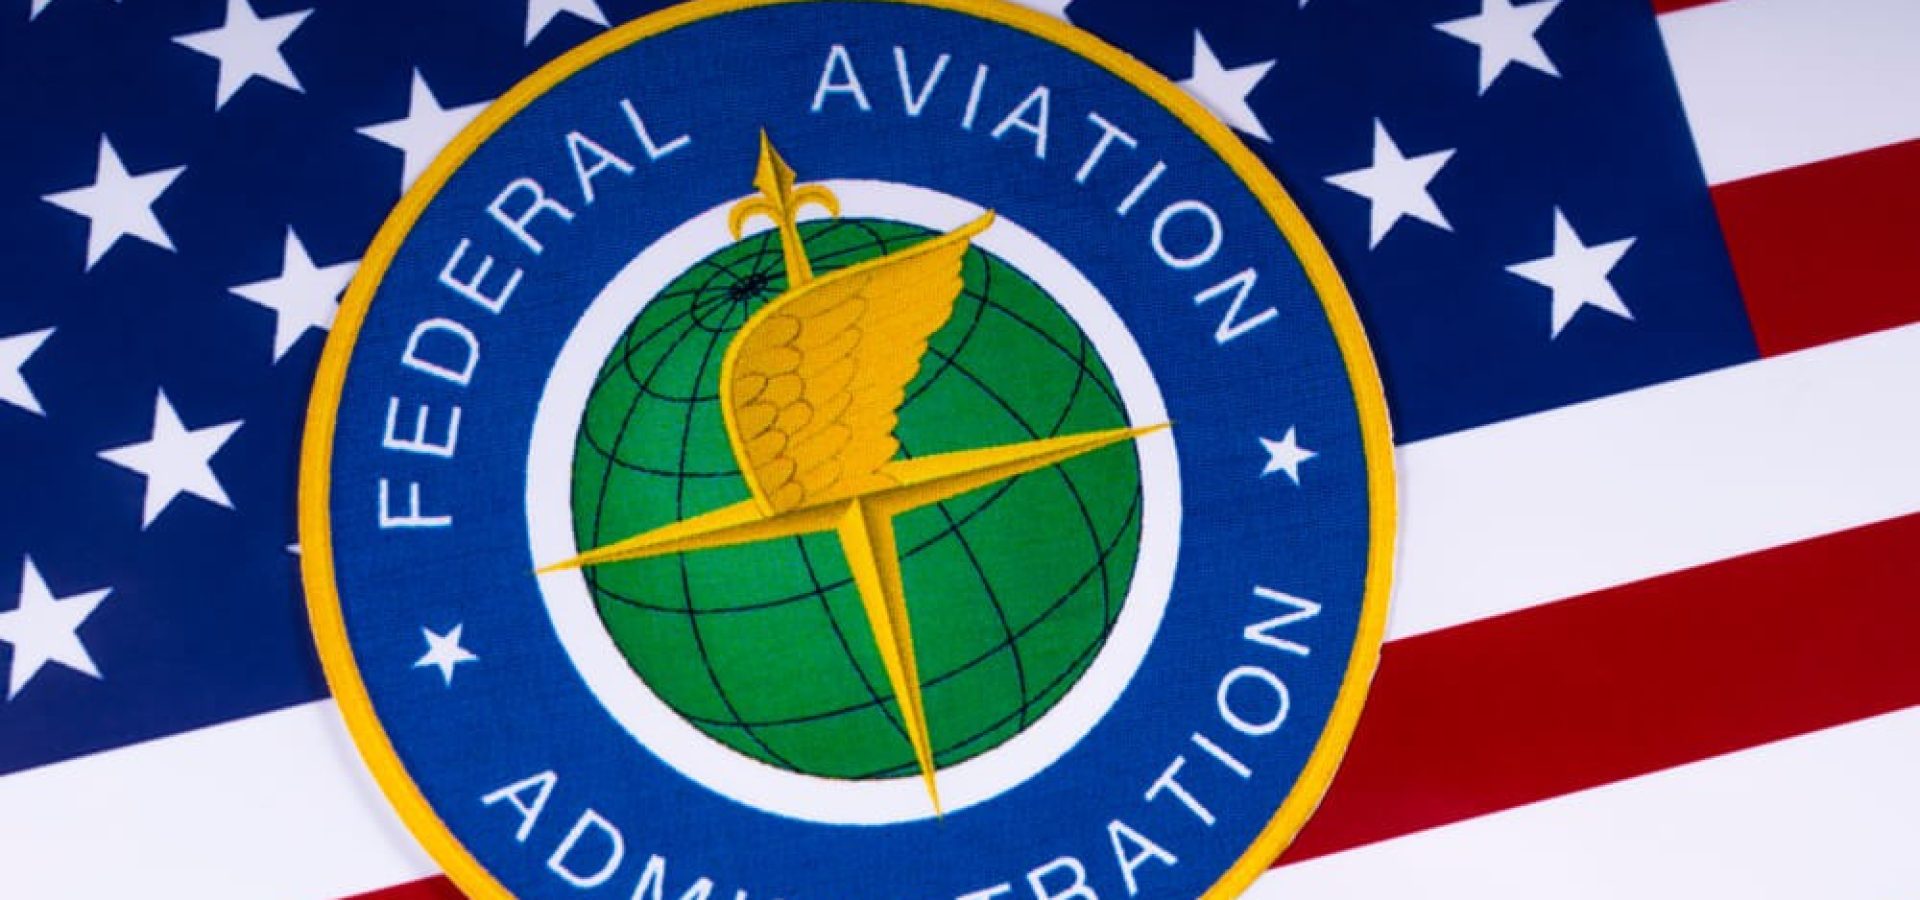 The symbol of the Federal Aviation Administration portrayed with the US flag.